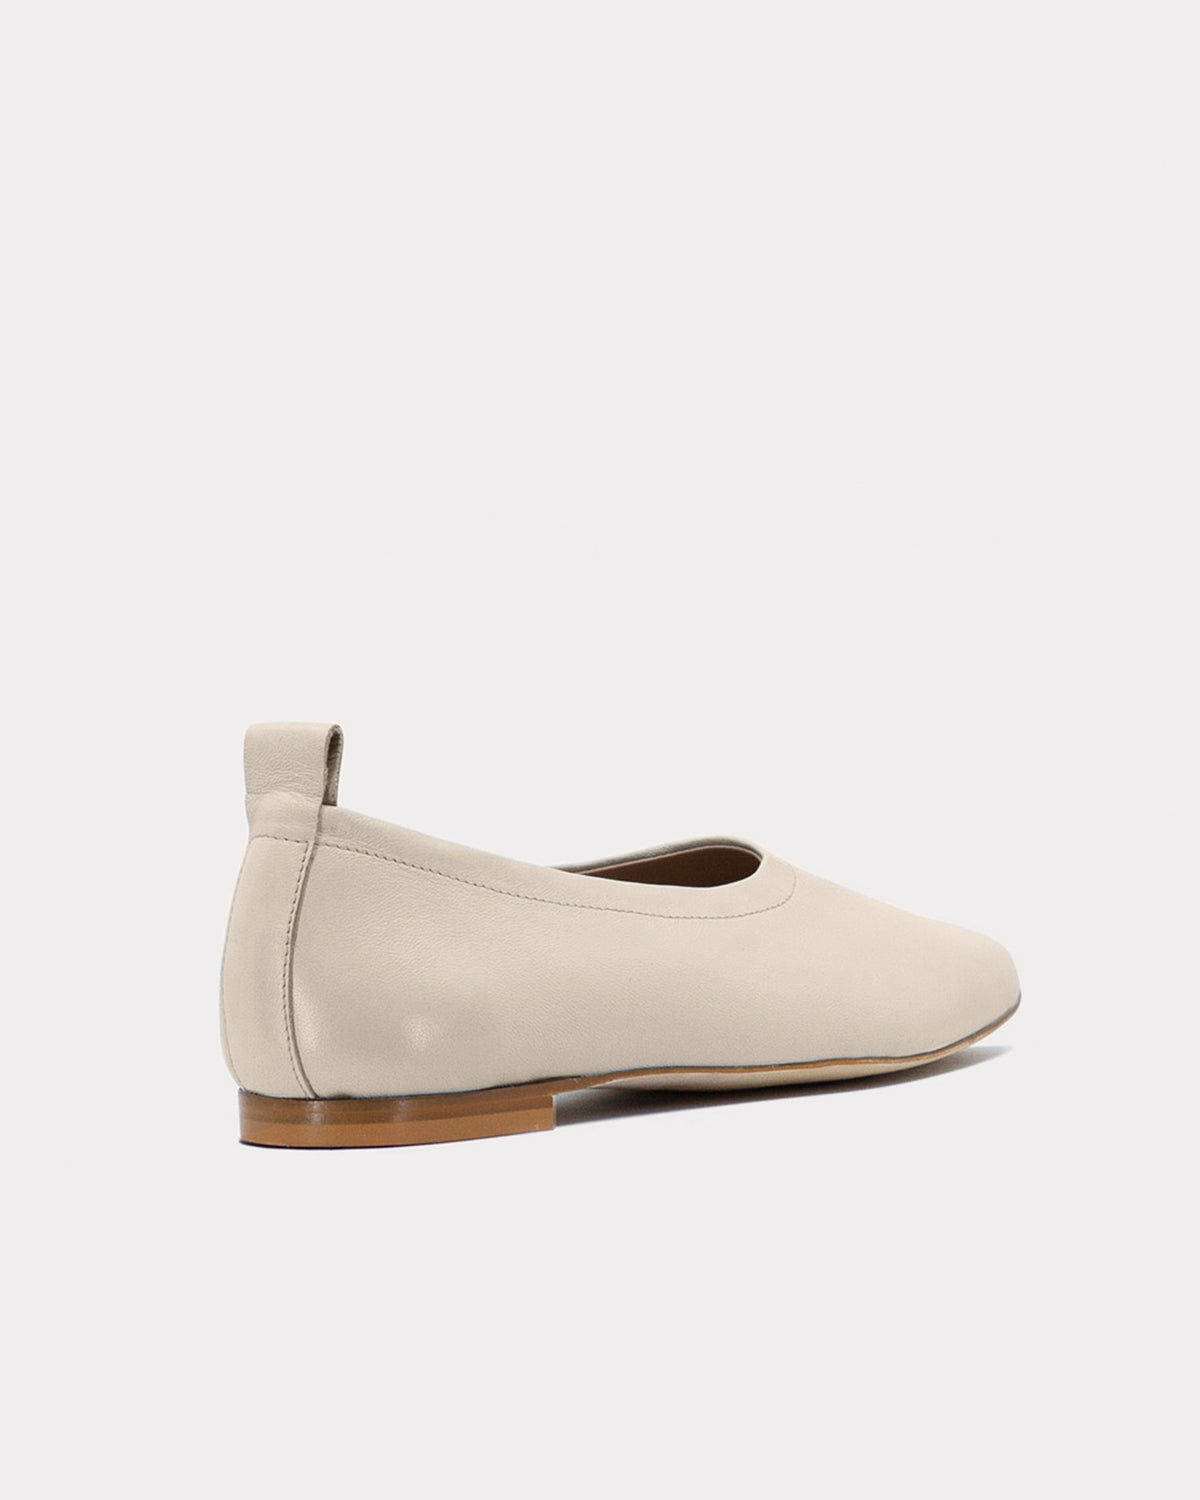 elegant leather flats made from ethical leather in ivory